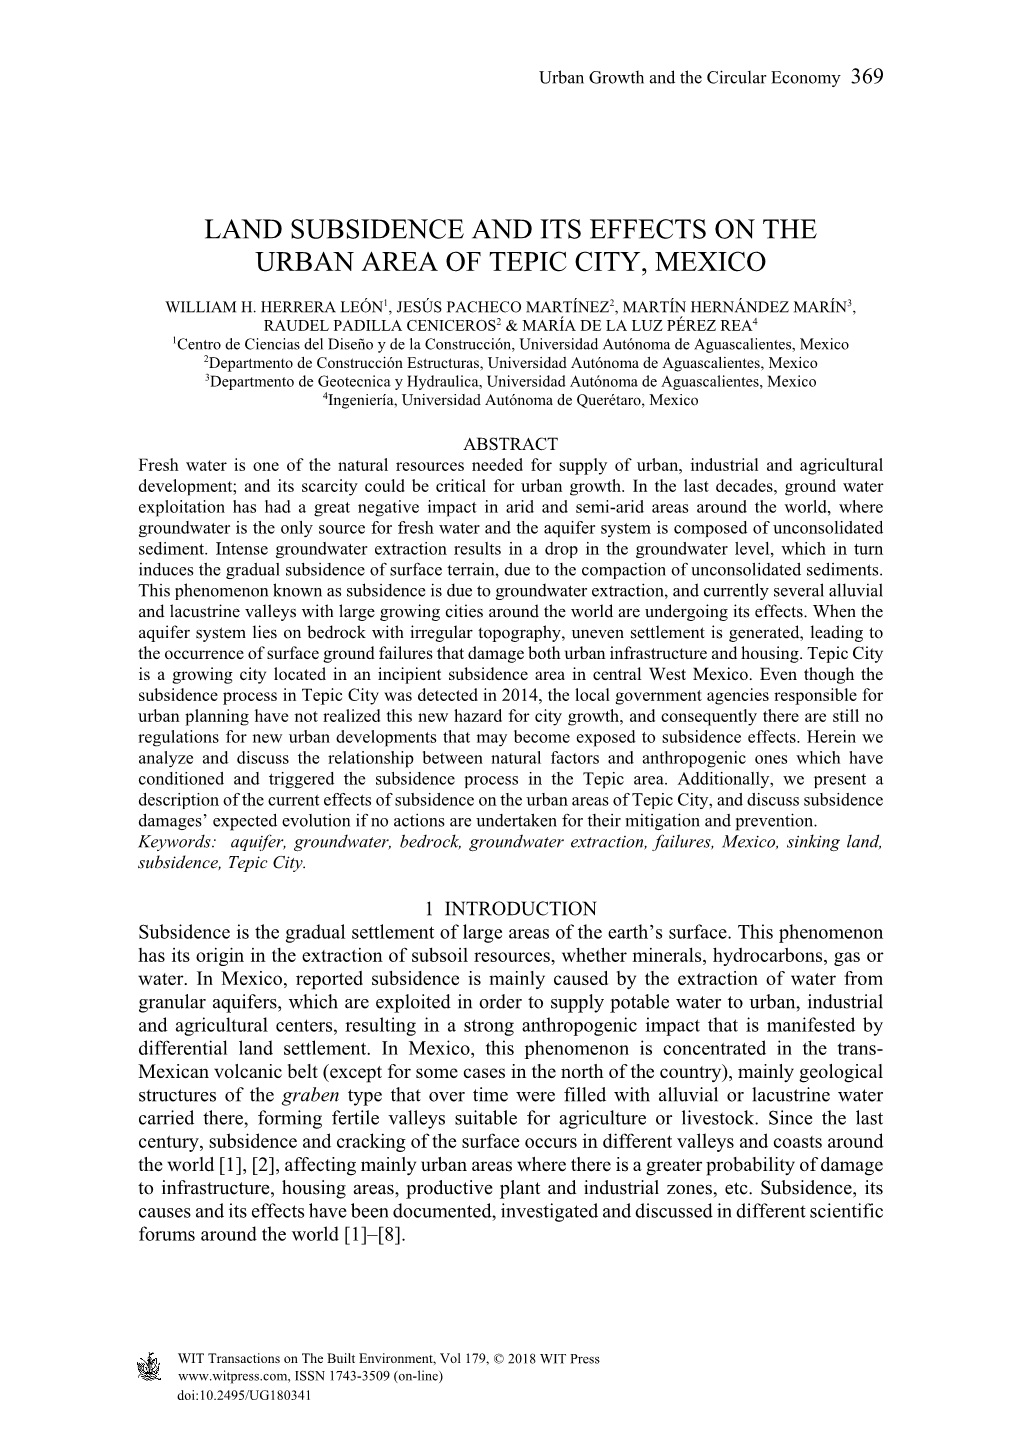 Land Subsidence and Its Effects on the Urban Area of Tepic City, Mexico